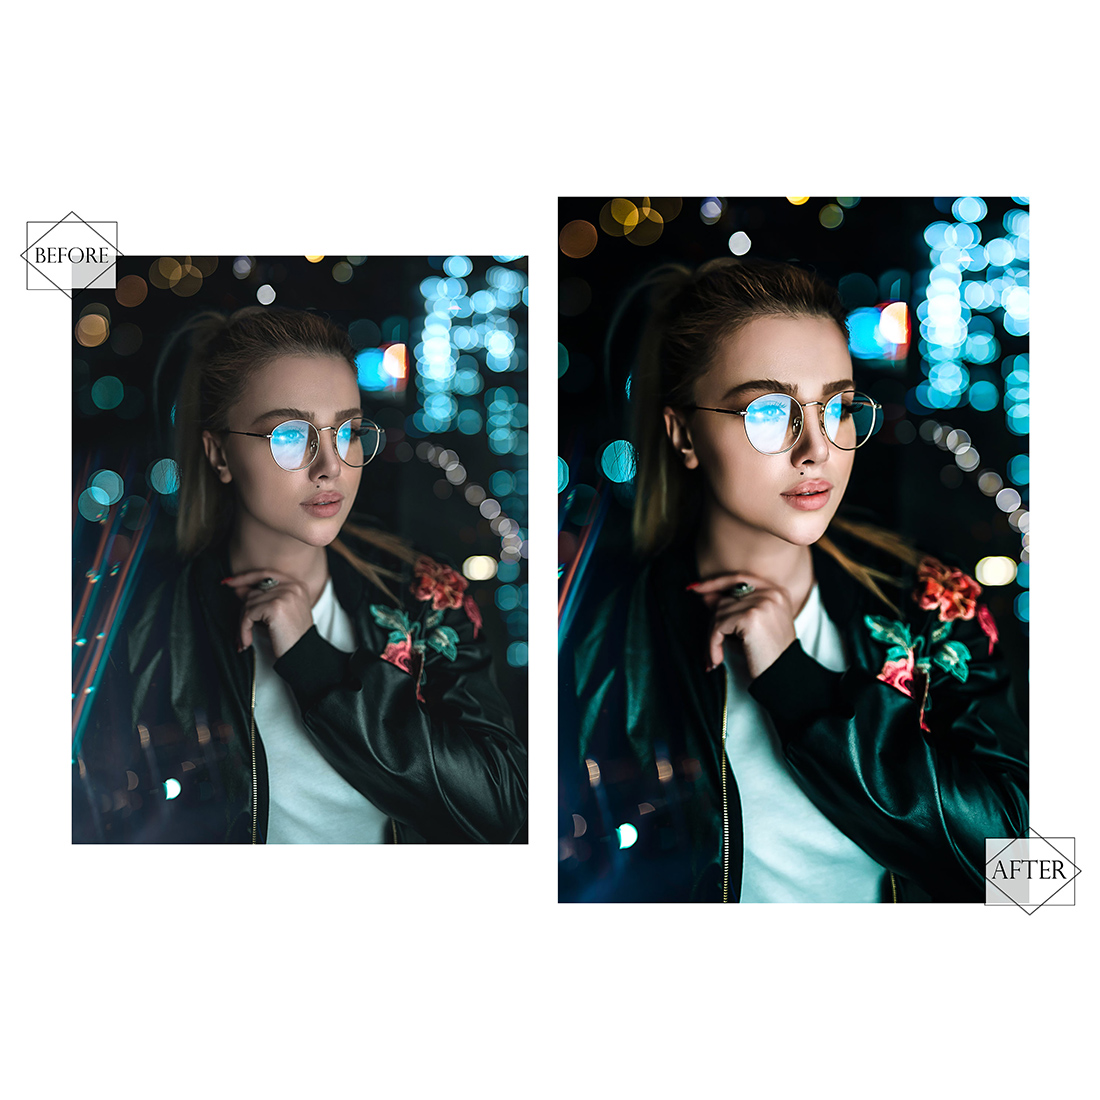 16 Photoshop Actions, Shiny Night Ps Action, Moody ACR Preset, Neon Filter, Lifestyle Theme For Instagram, Light Presets, Street Portrait preview image.